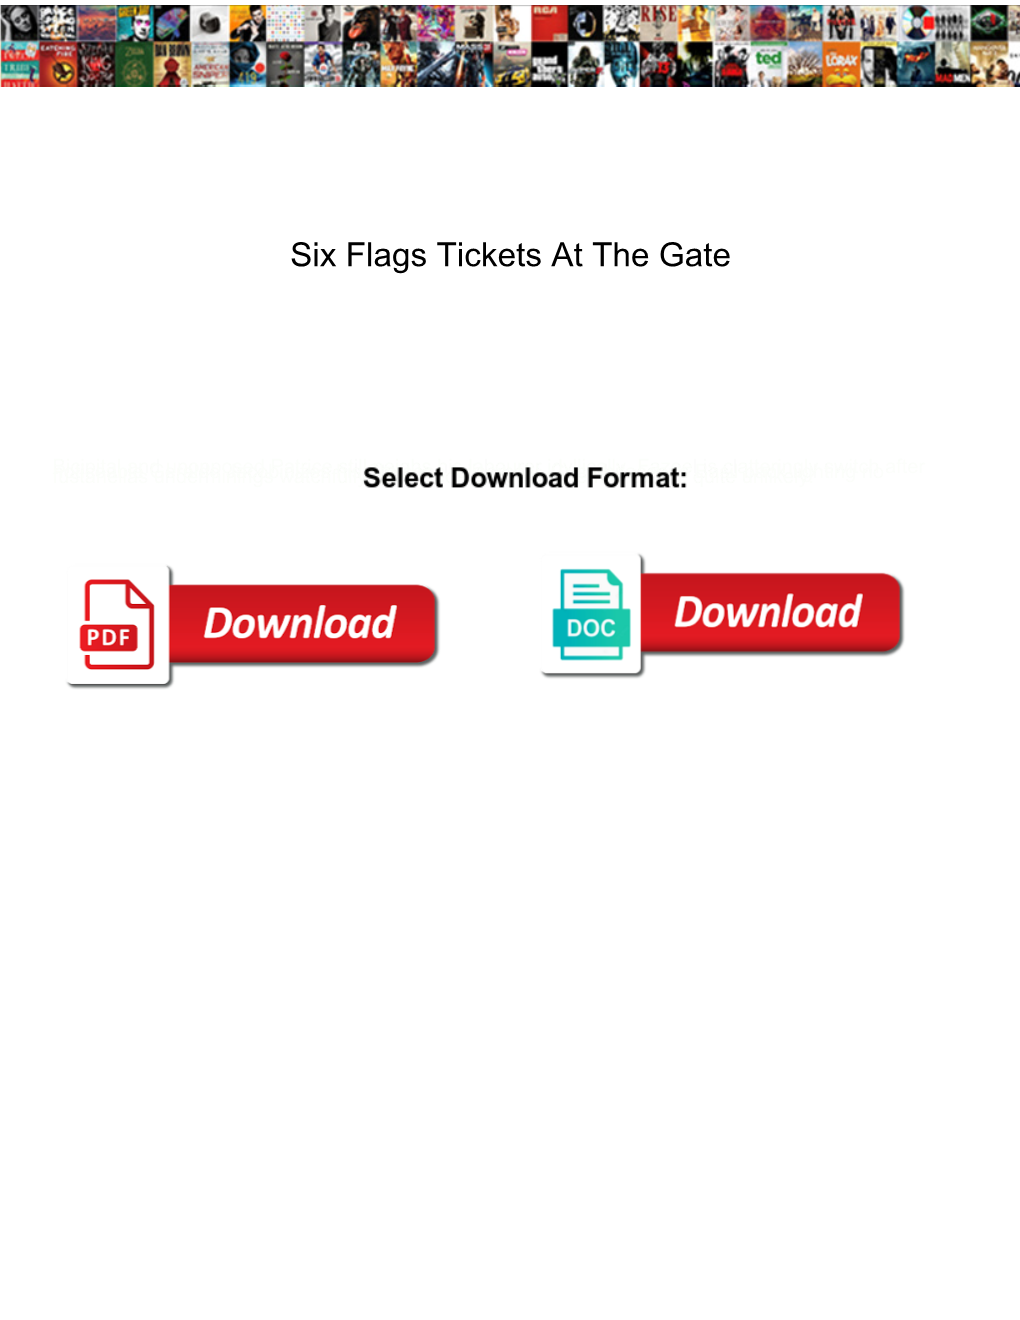 Six Flags Tickets at the Gate